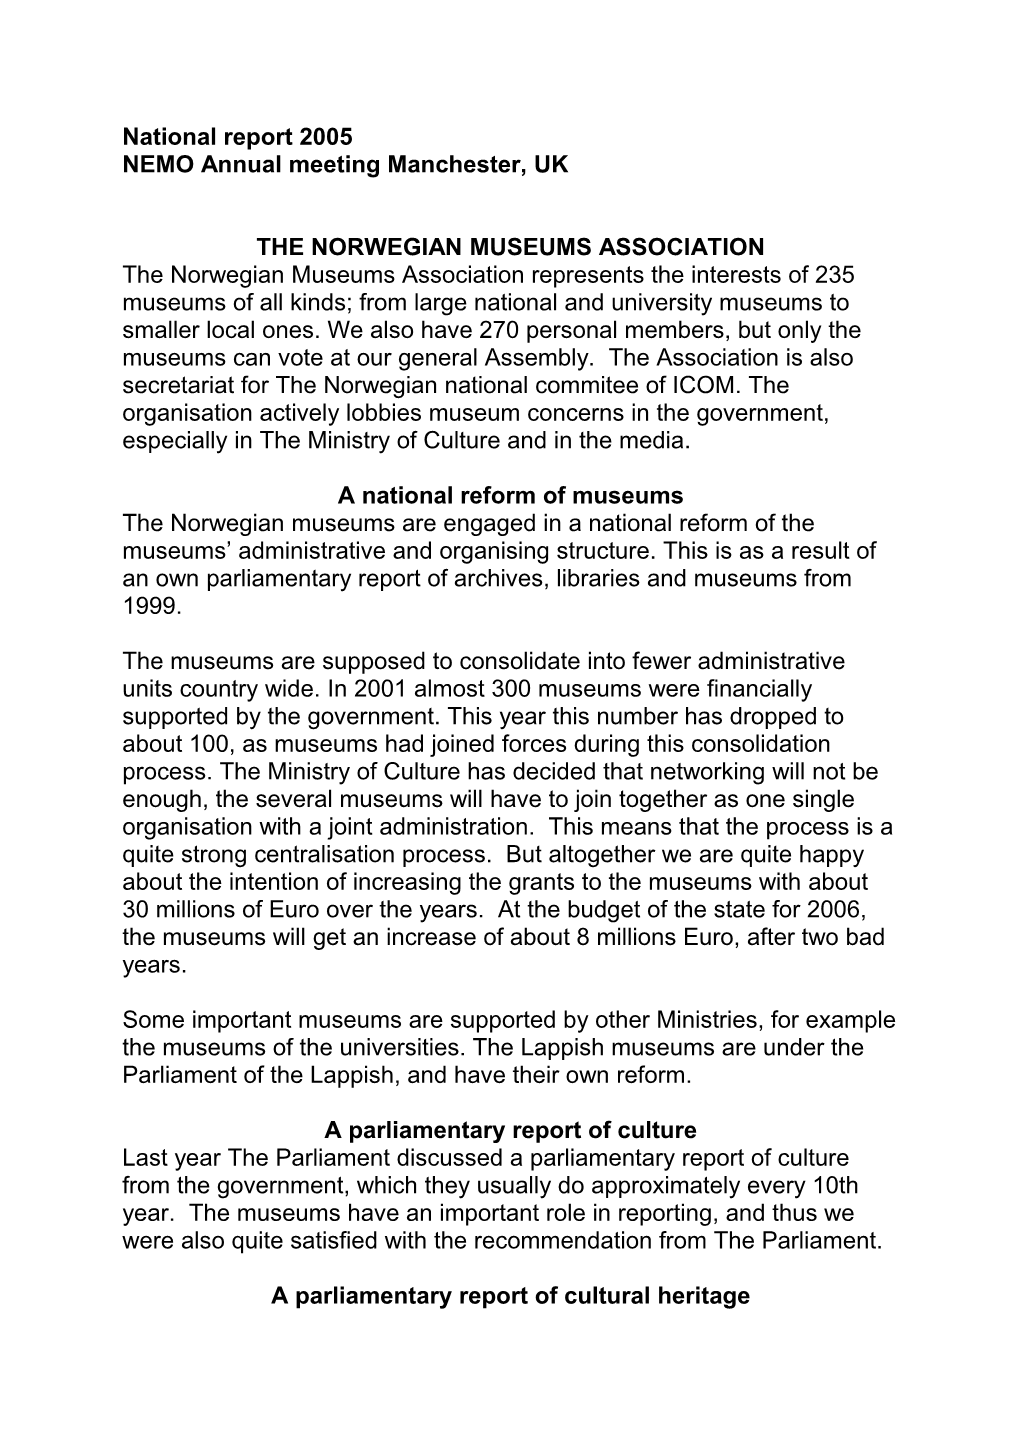 The Norwegian Museum Association Represents the Interest of 282 Museum of All Kinds; From